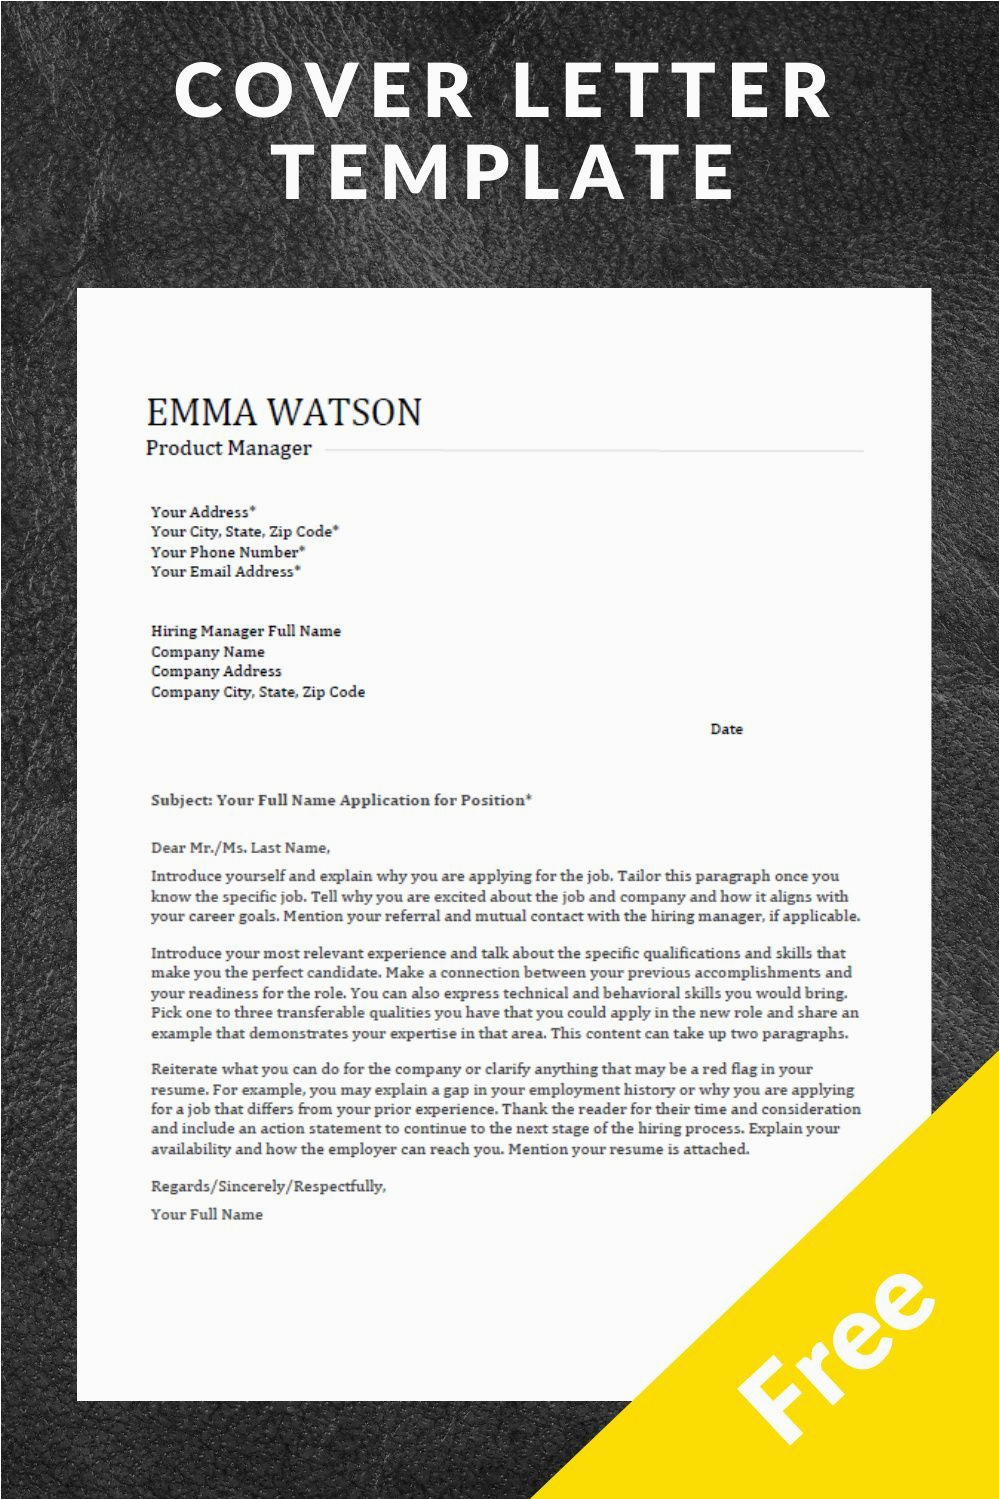 Free Resume and Cover Letter Templates Downloads Cover Letter Template Download for Free